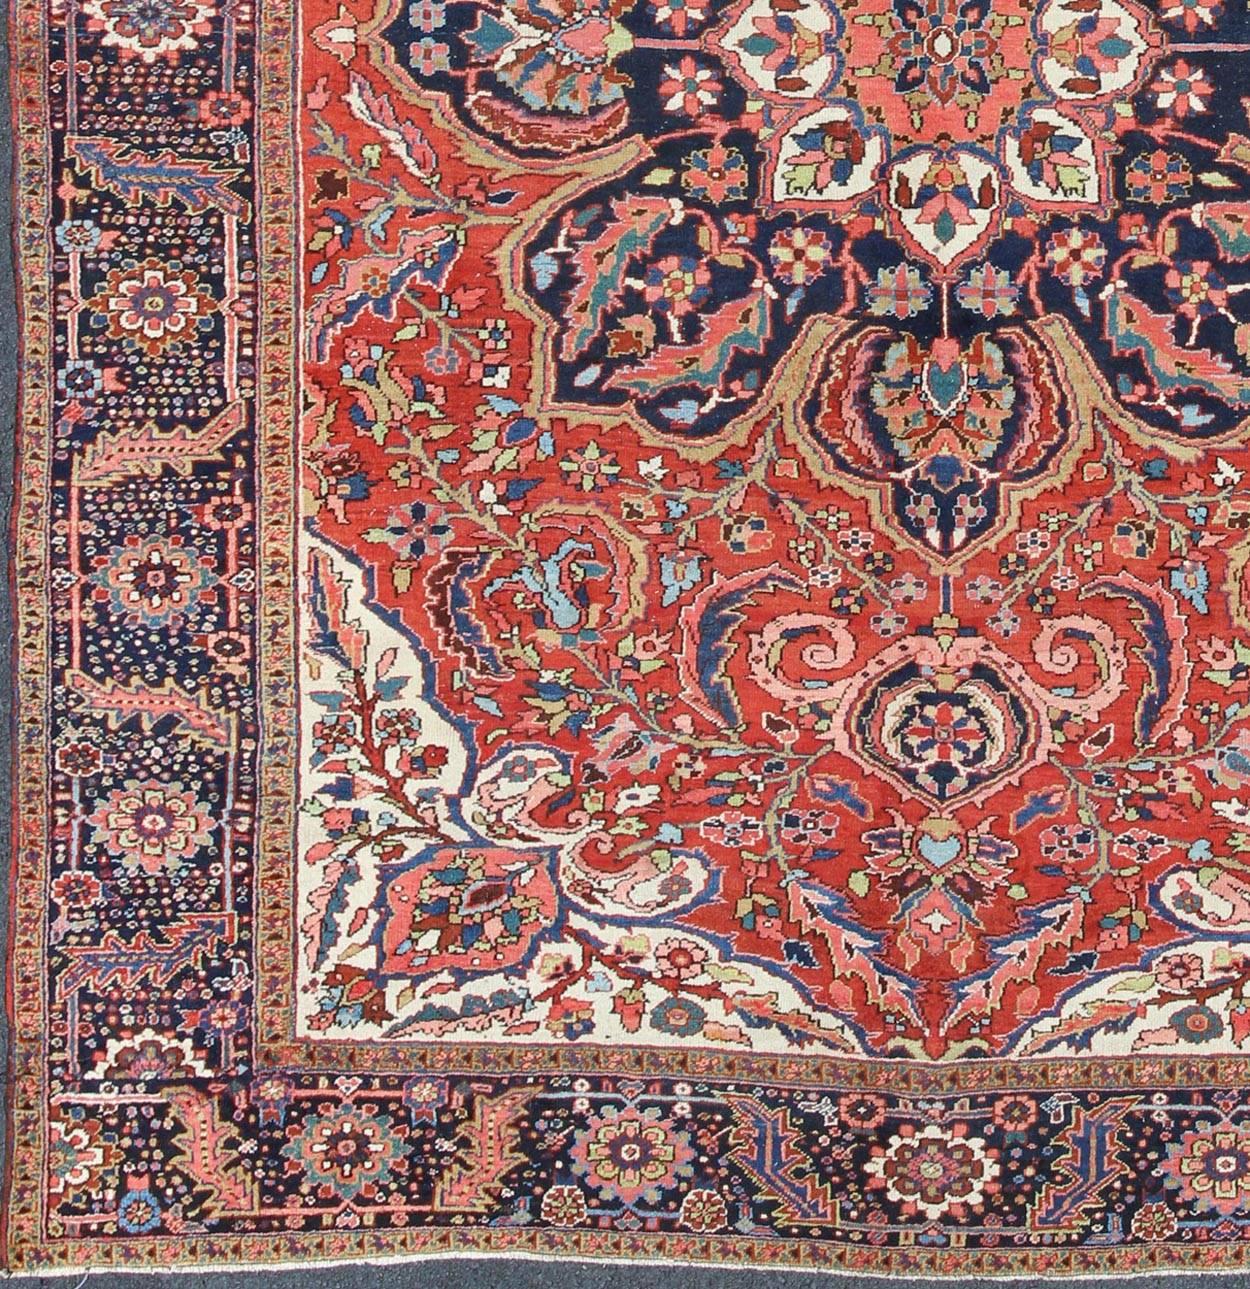 Large Persian Heriz Rug with Geometric Medallion in Rust, Pink, Green and Blue.  Keivan Woven Arts / Rug / M14-0501, country of origin / type: Iran /Heriz, circa 1930. 
Measures: 10'1 x 13'5.
Masterful craftsmanship and a strong tribal design make